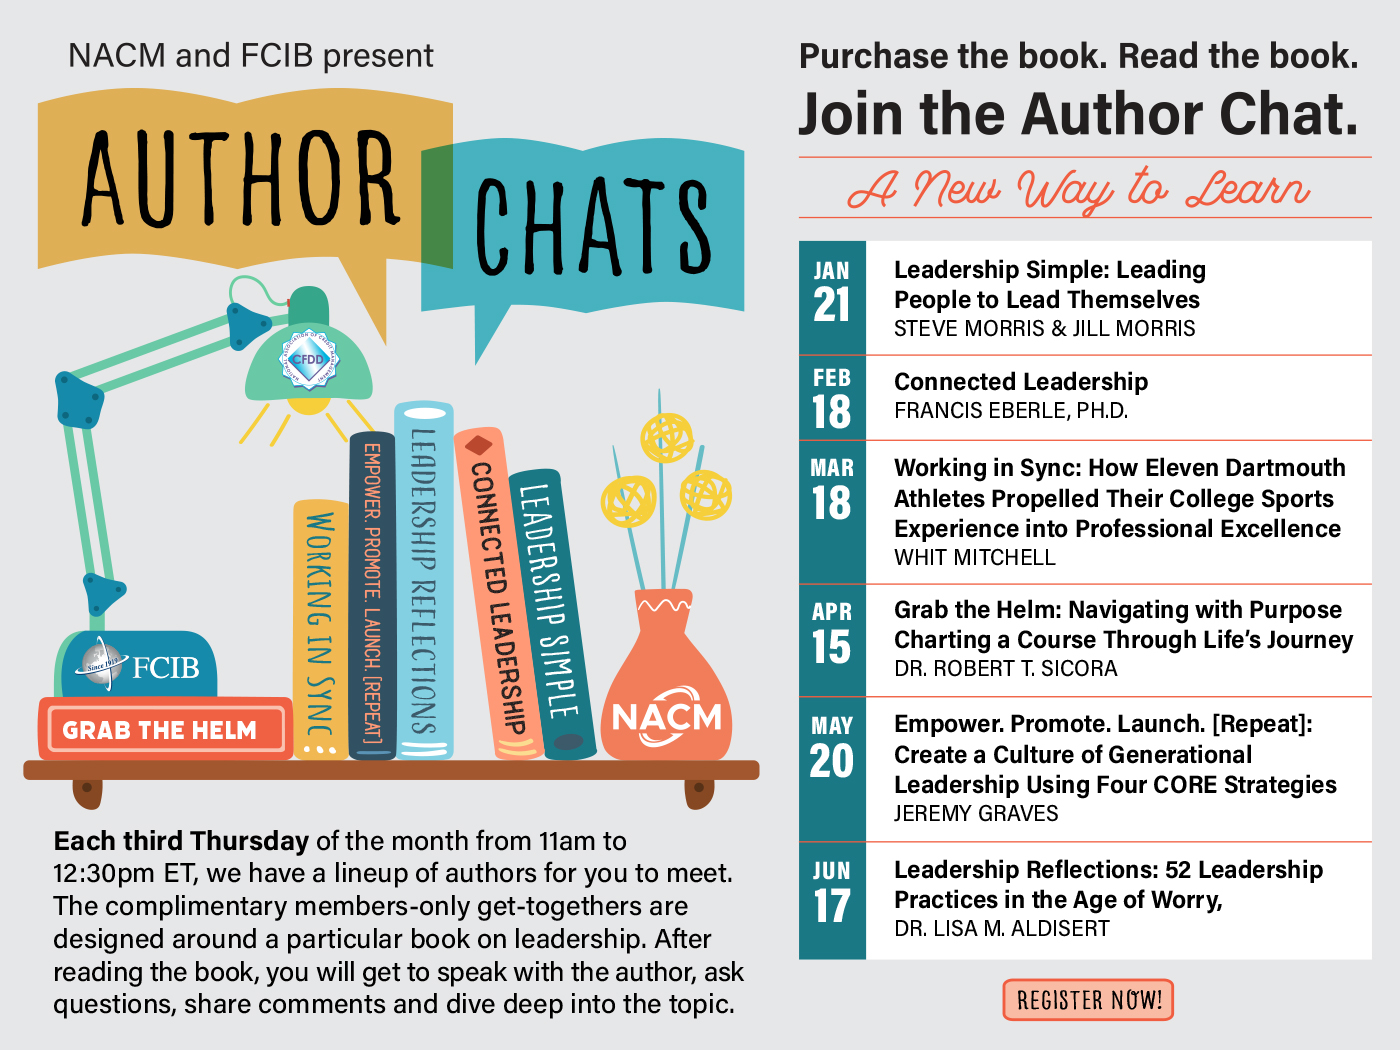 NACM and FCIB present, Author Chats. Every 3rd Thursday of the month from 11am to 12:30pm ET